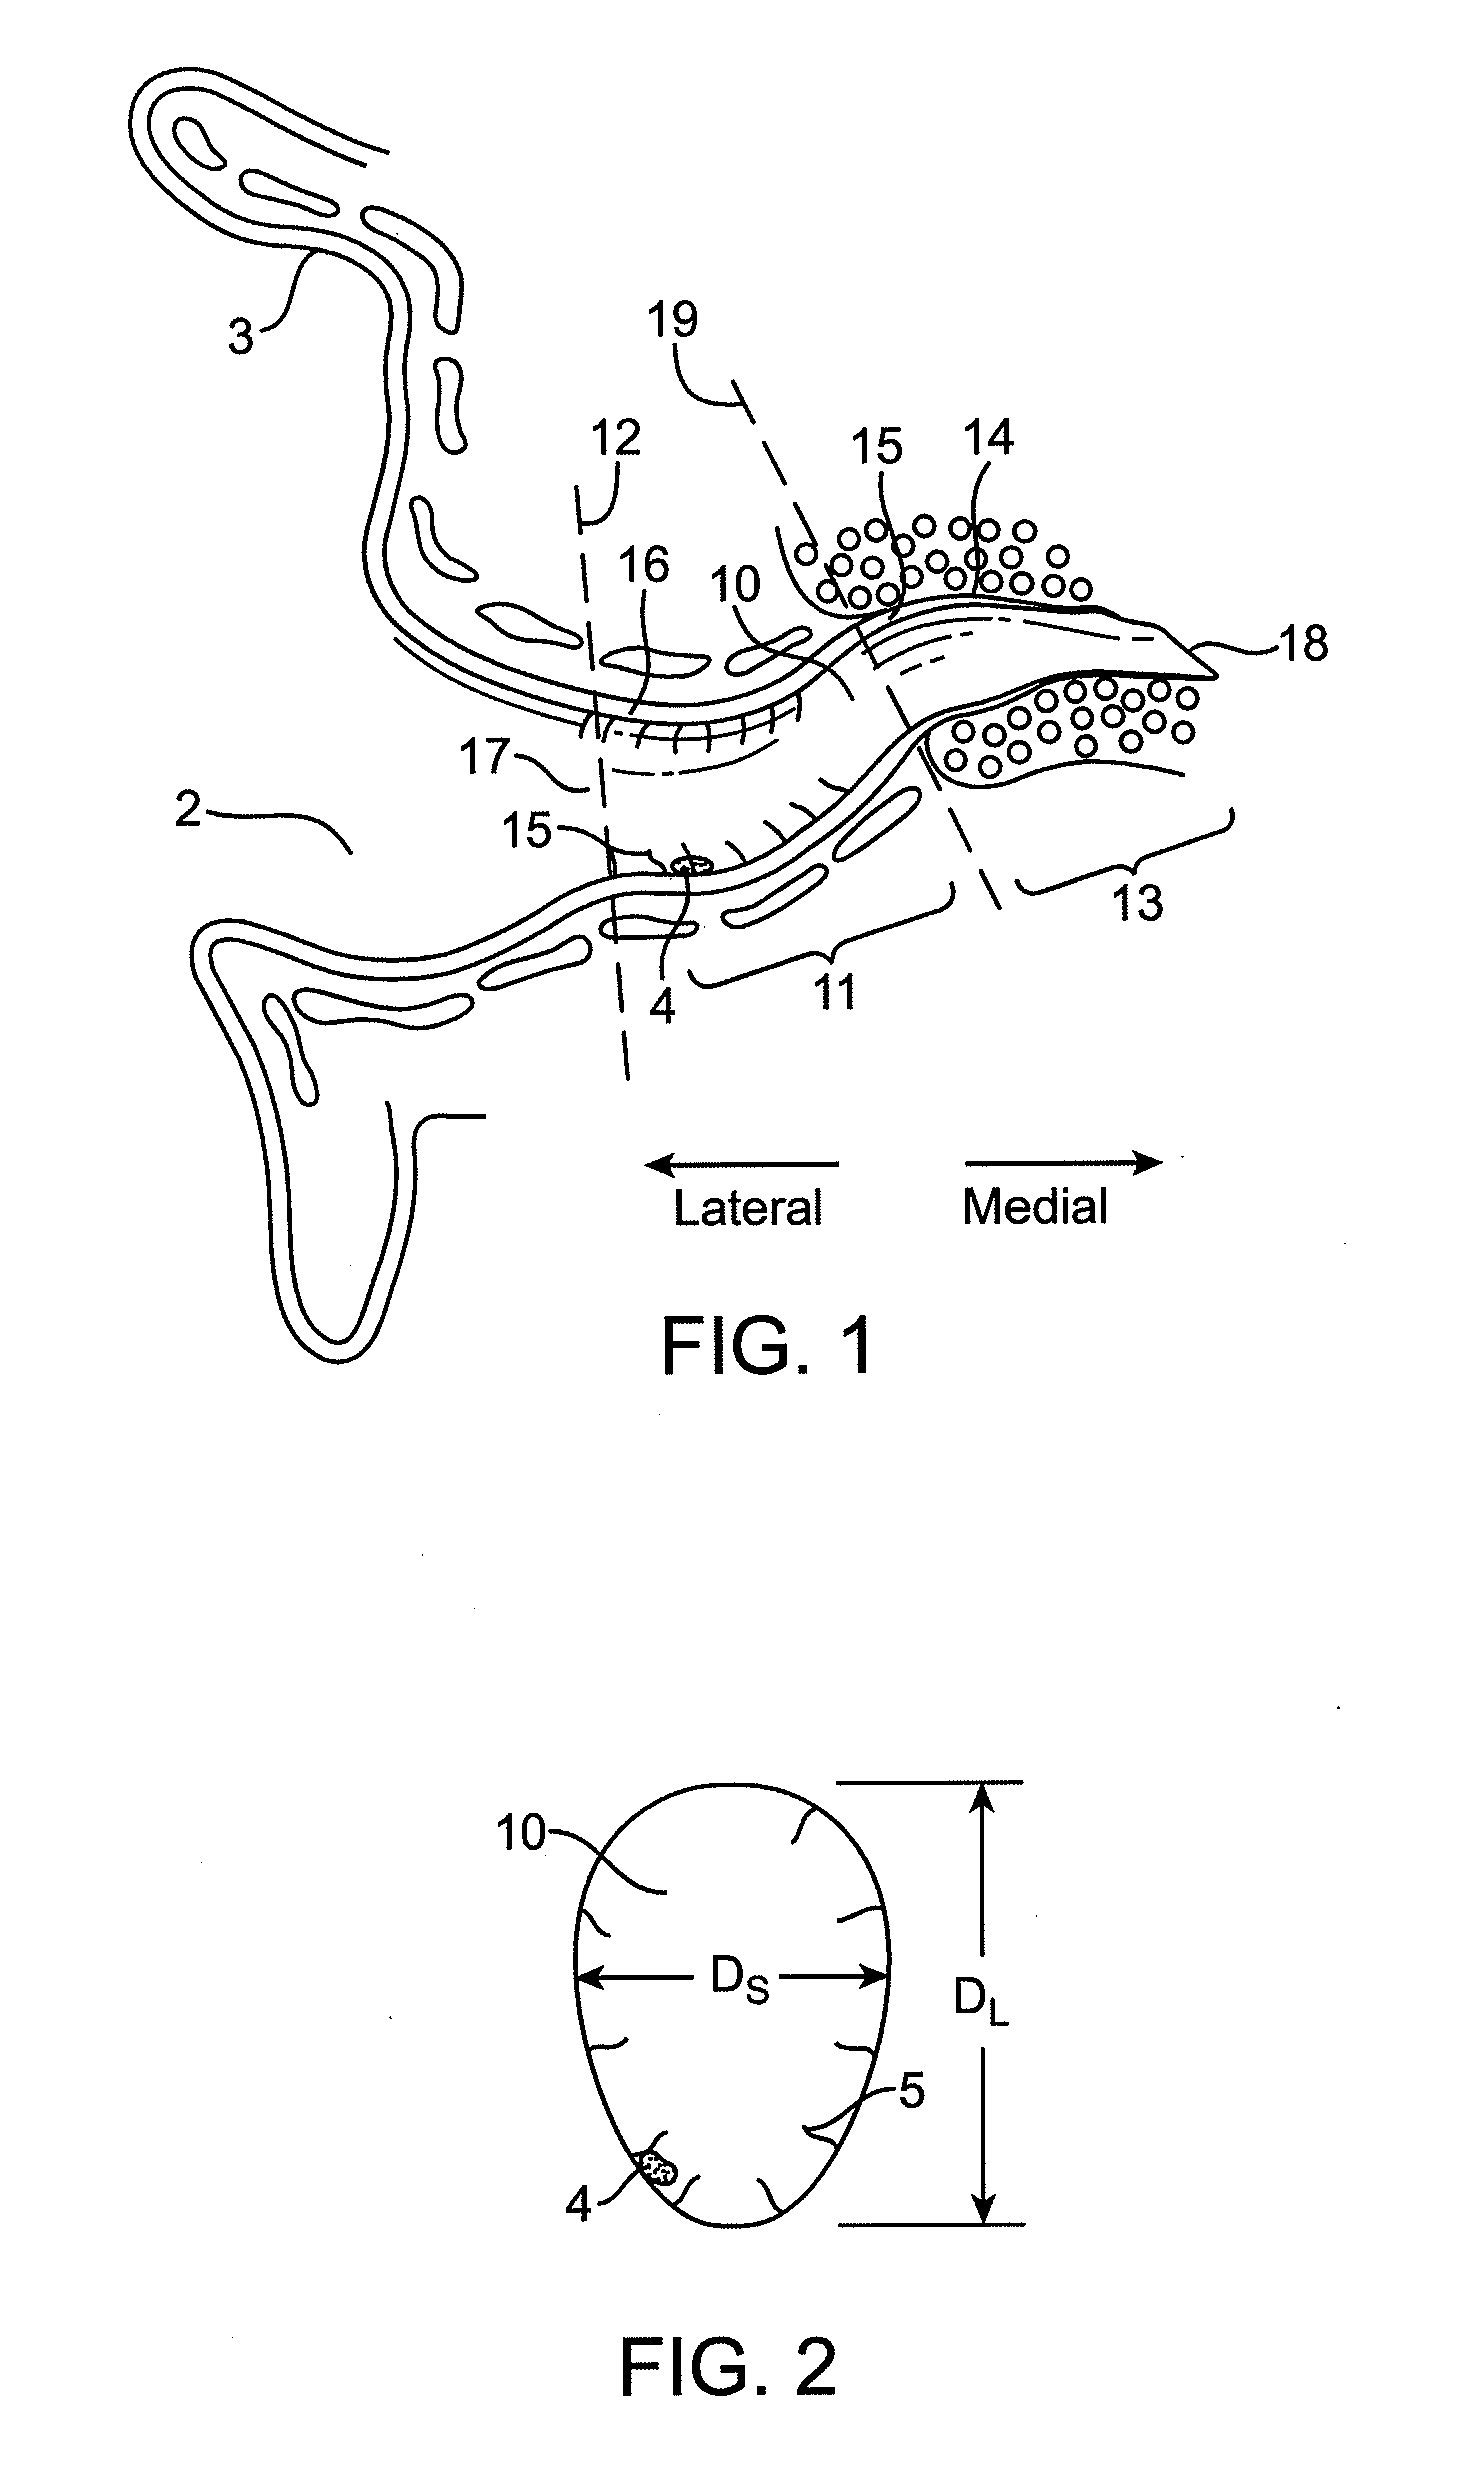 Tool for insertion and removal of in-canal hearing devices